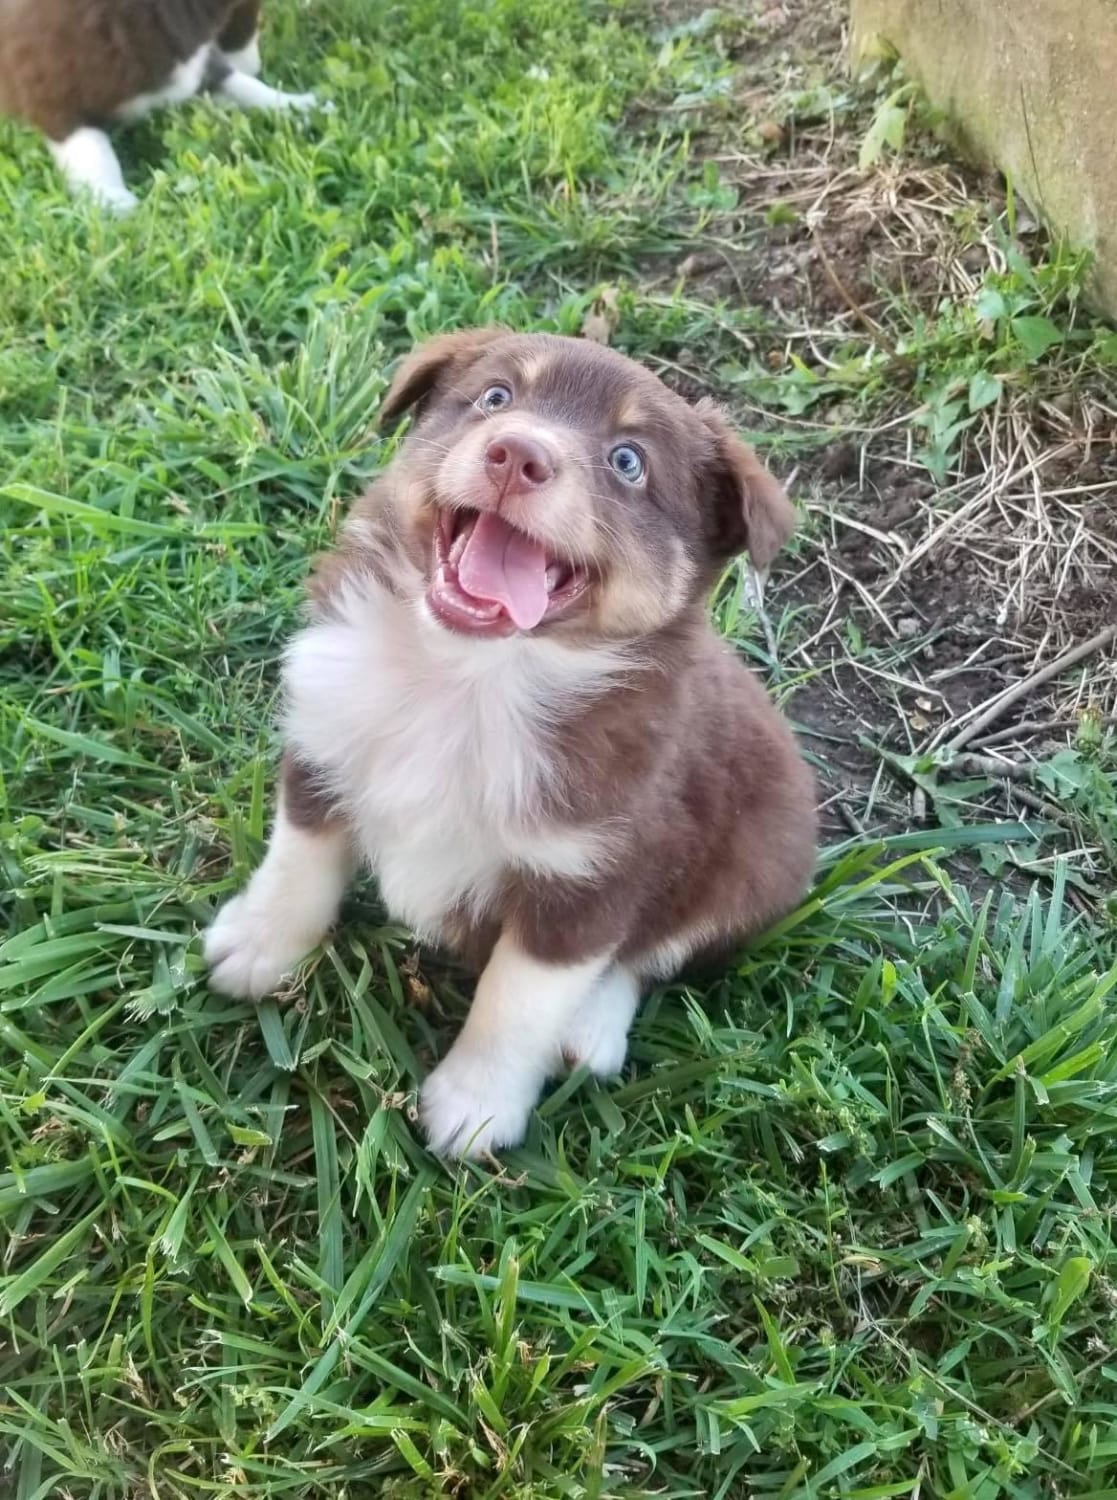 Bringing home a new derp addition in a few weeks! Meet Ruby, the Aussie.